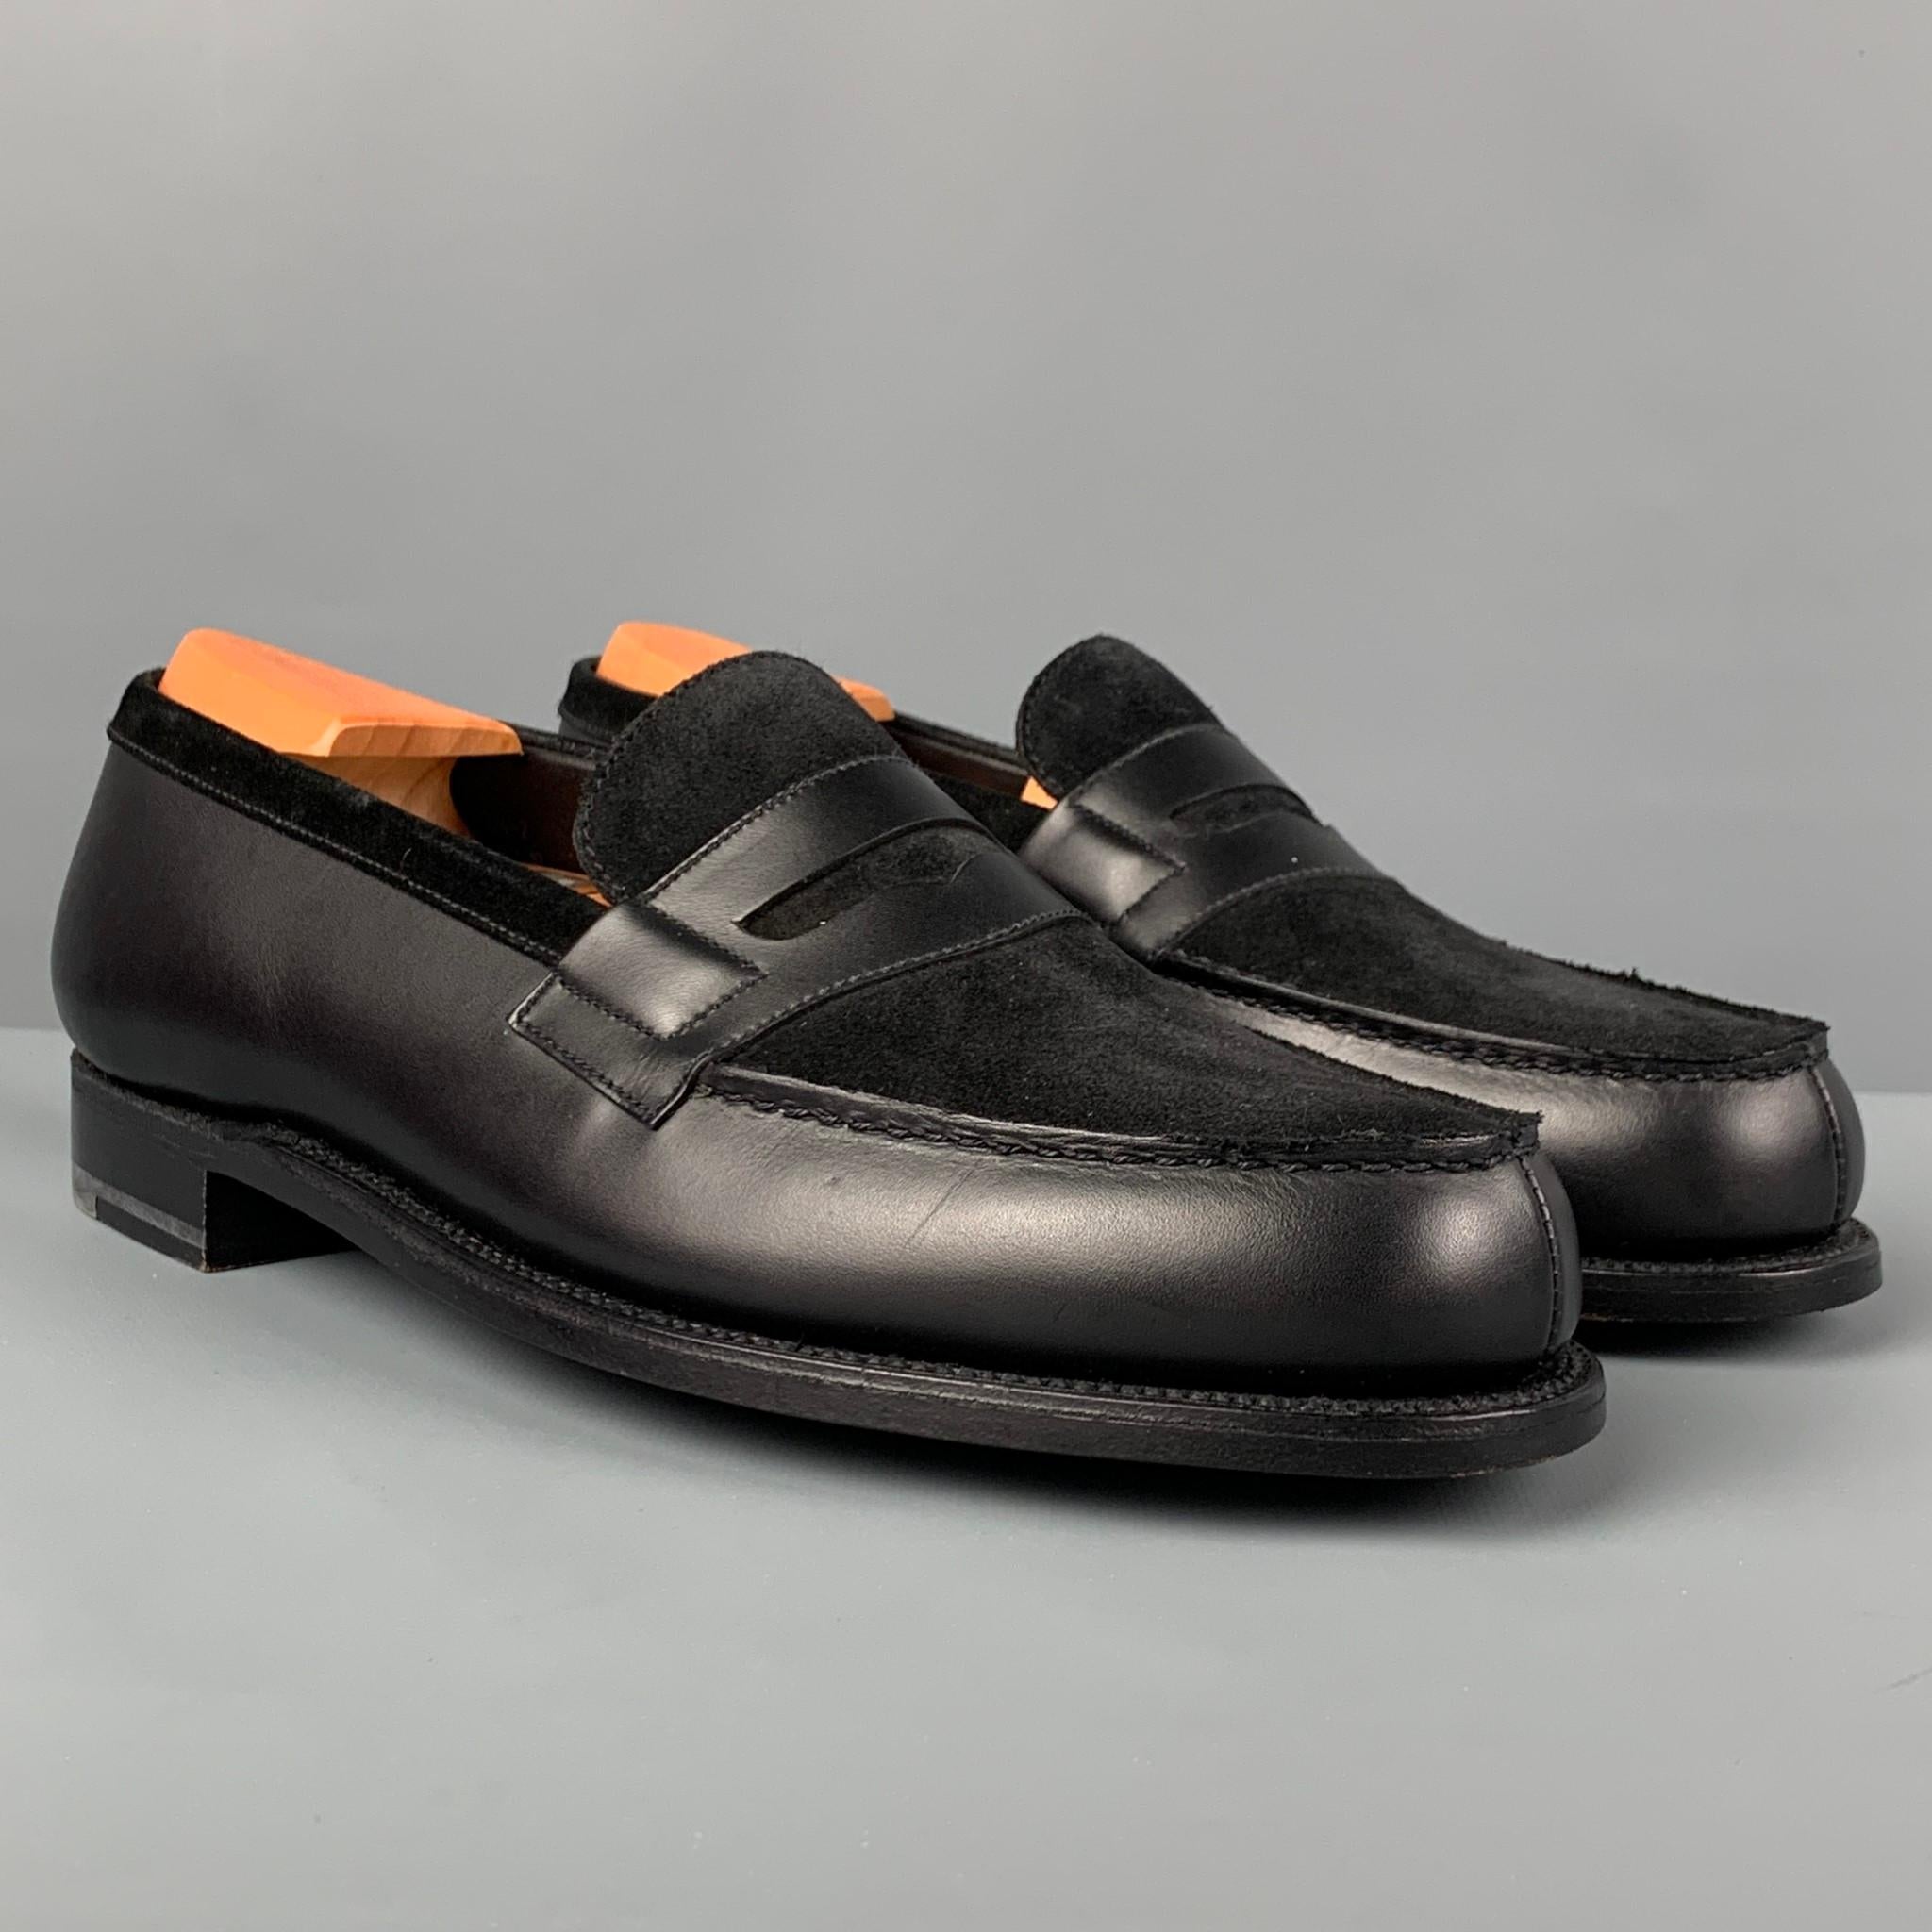 J.M. WESTON loafers comes in a black leather featuring a suede trim and a penny strap. Comes with shoe trees. 

Excellent Pre-Owned Condition.
Marked: 6 C

Outsole: 10.5 in. x 3.75 in. 